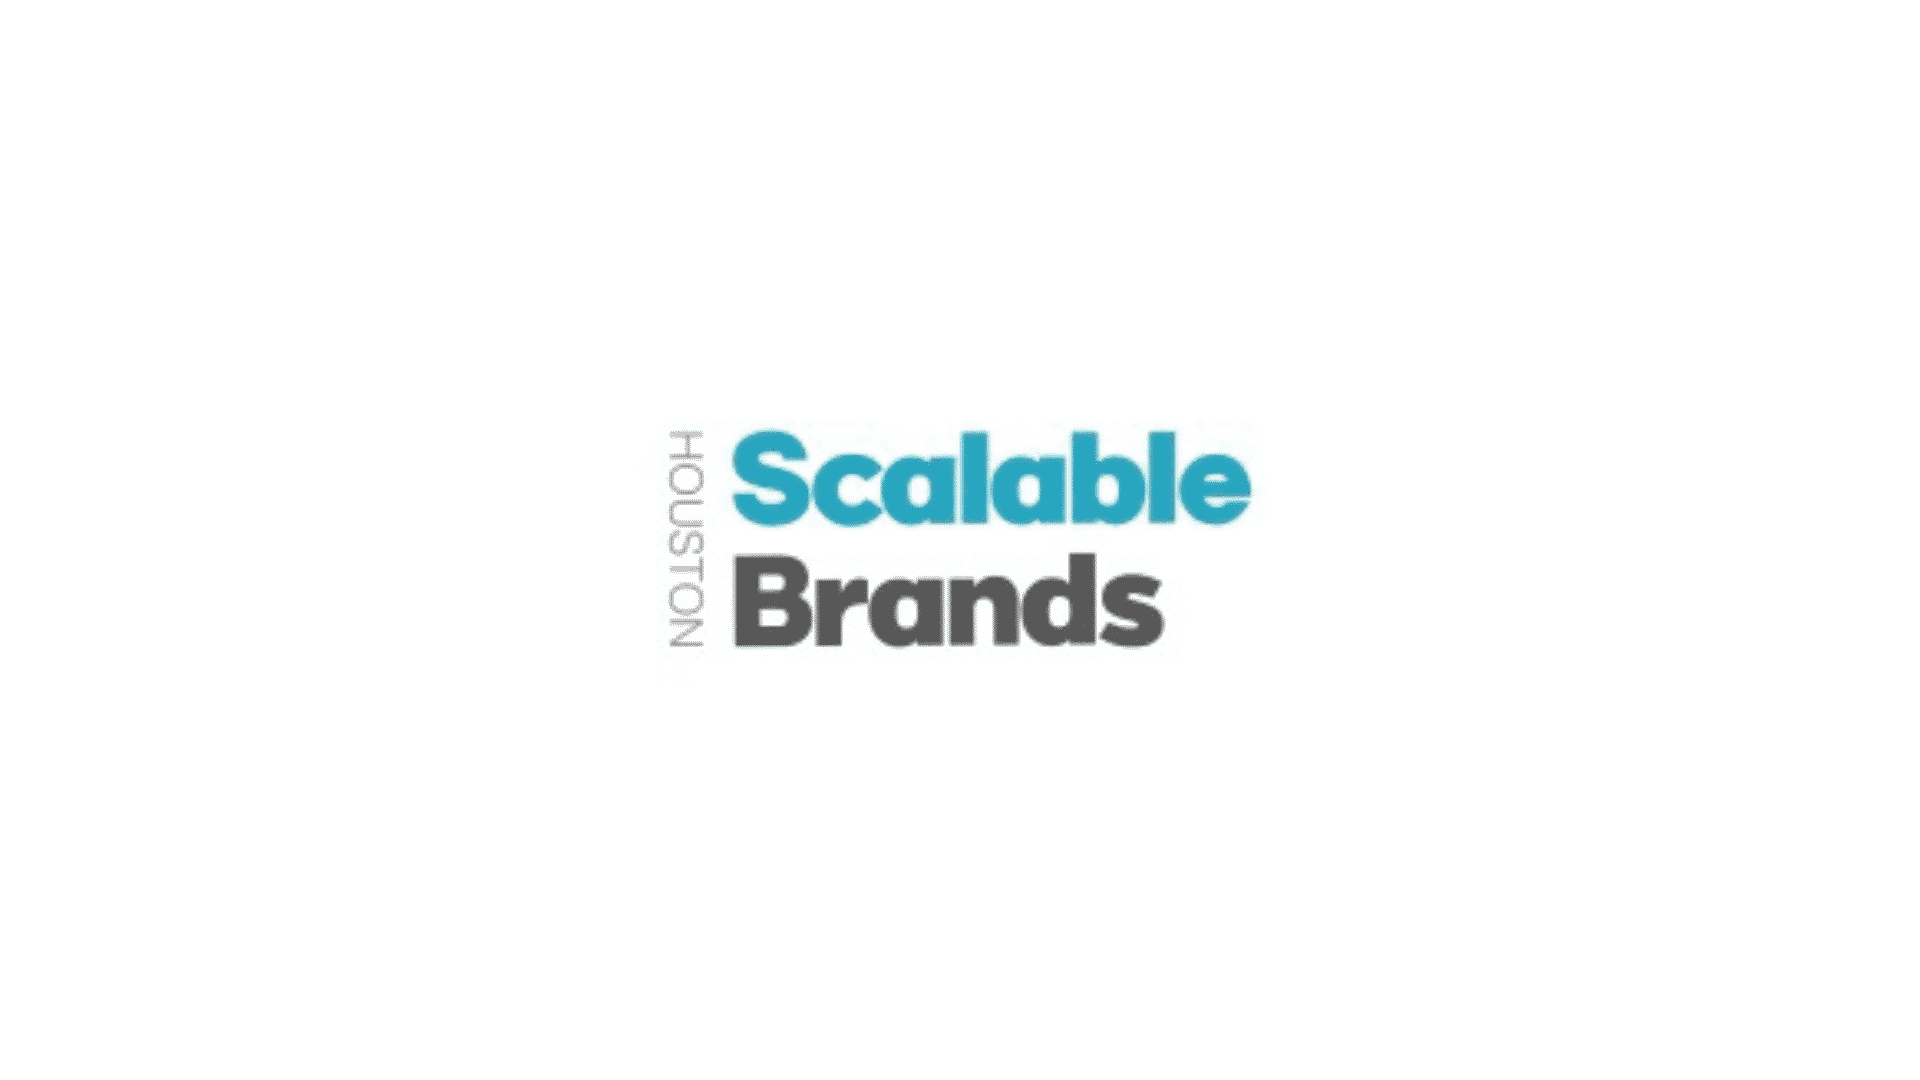 Advisor at Scalable Brands